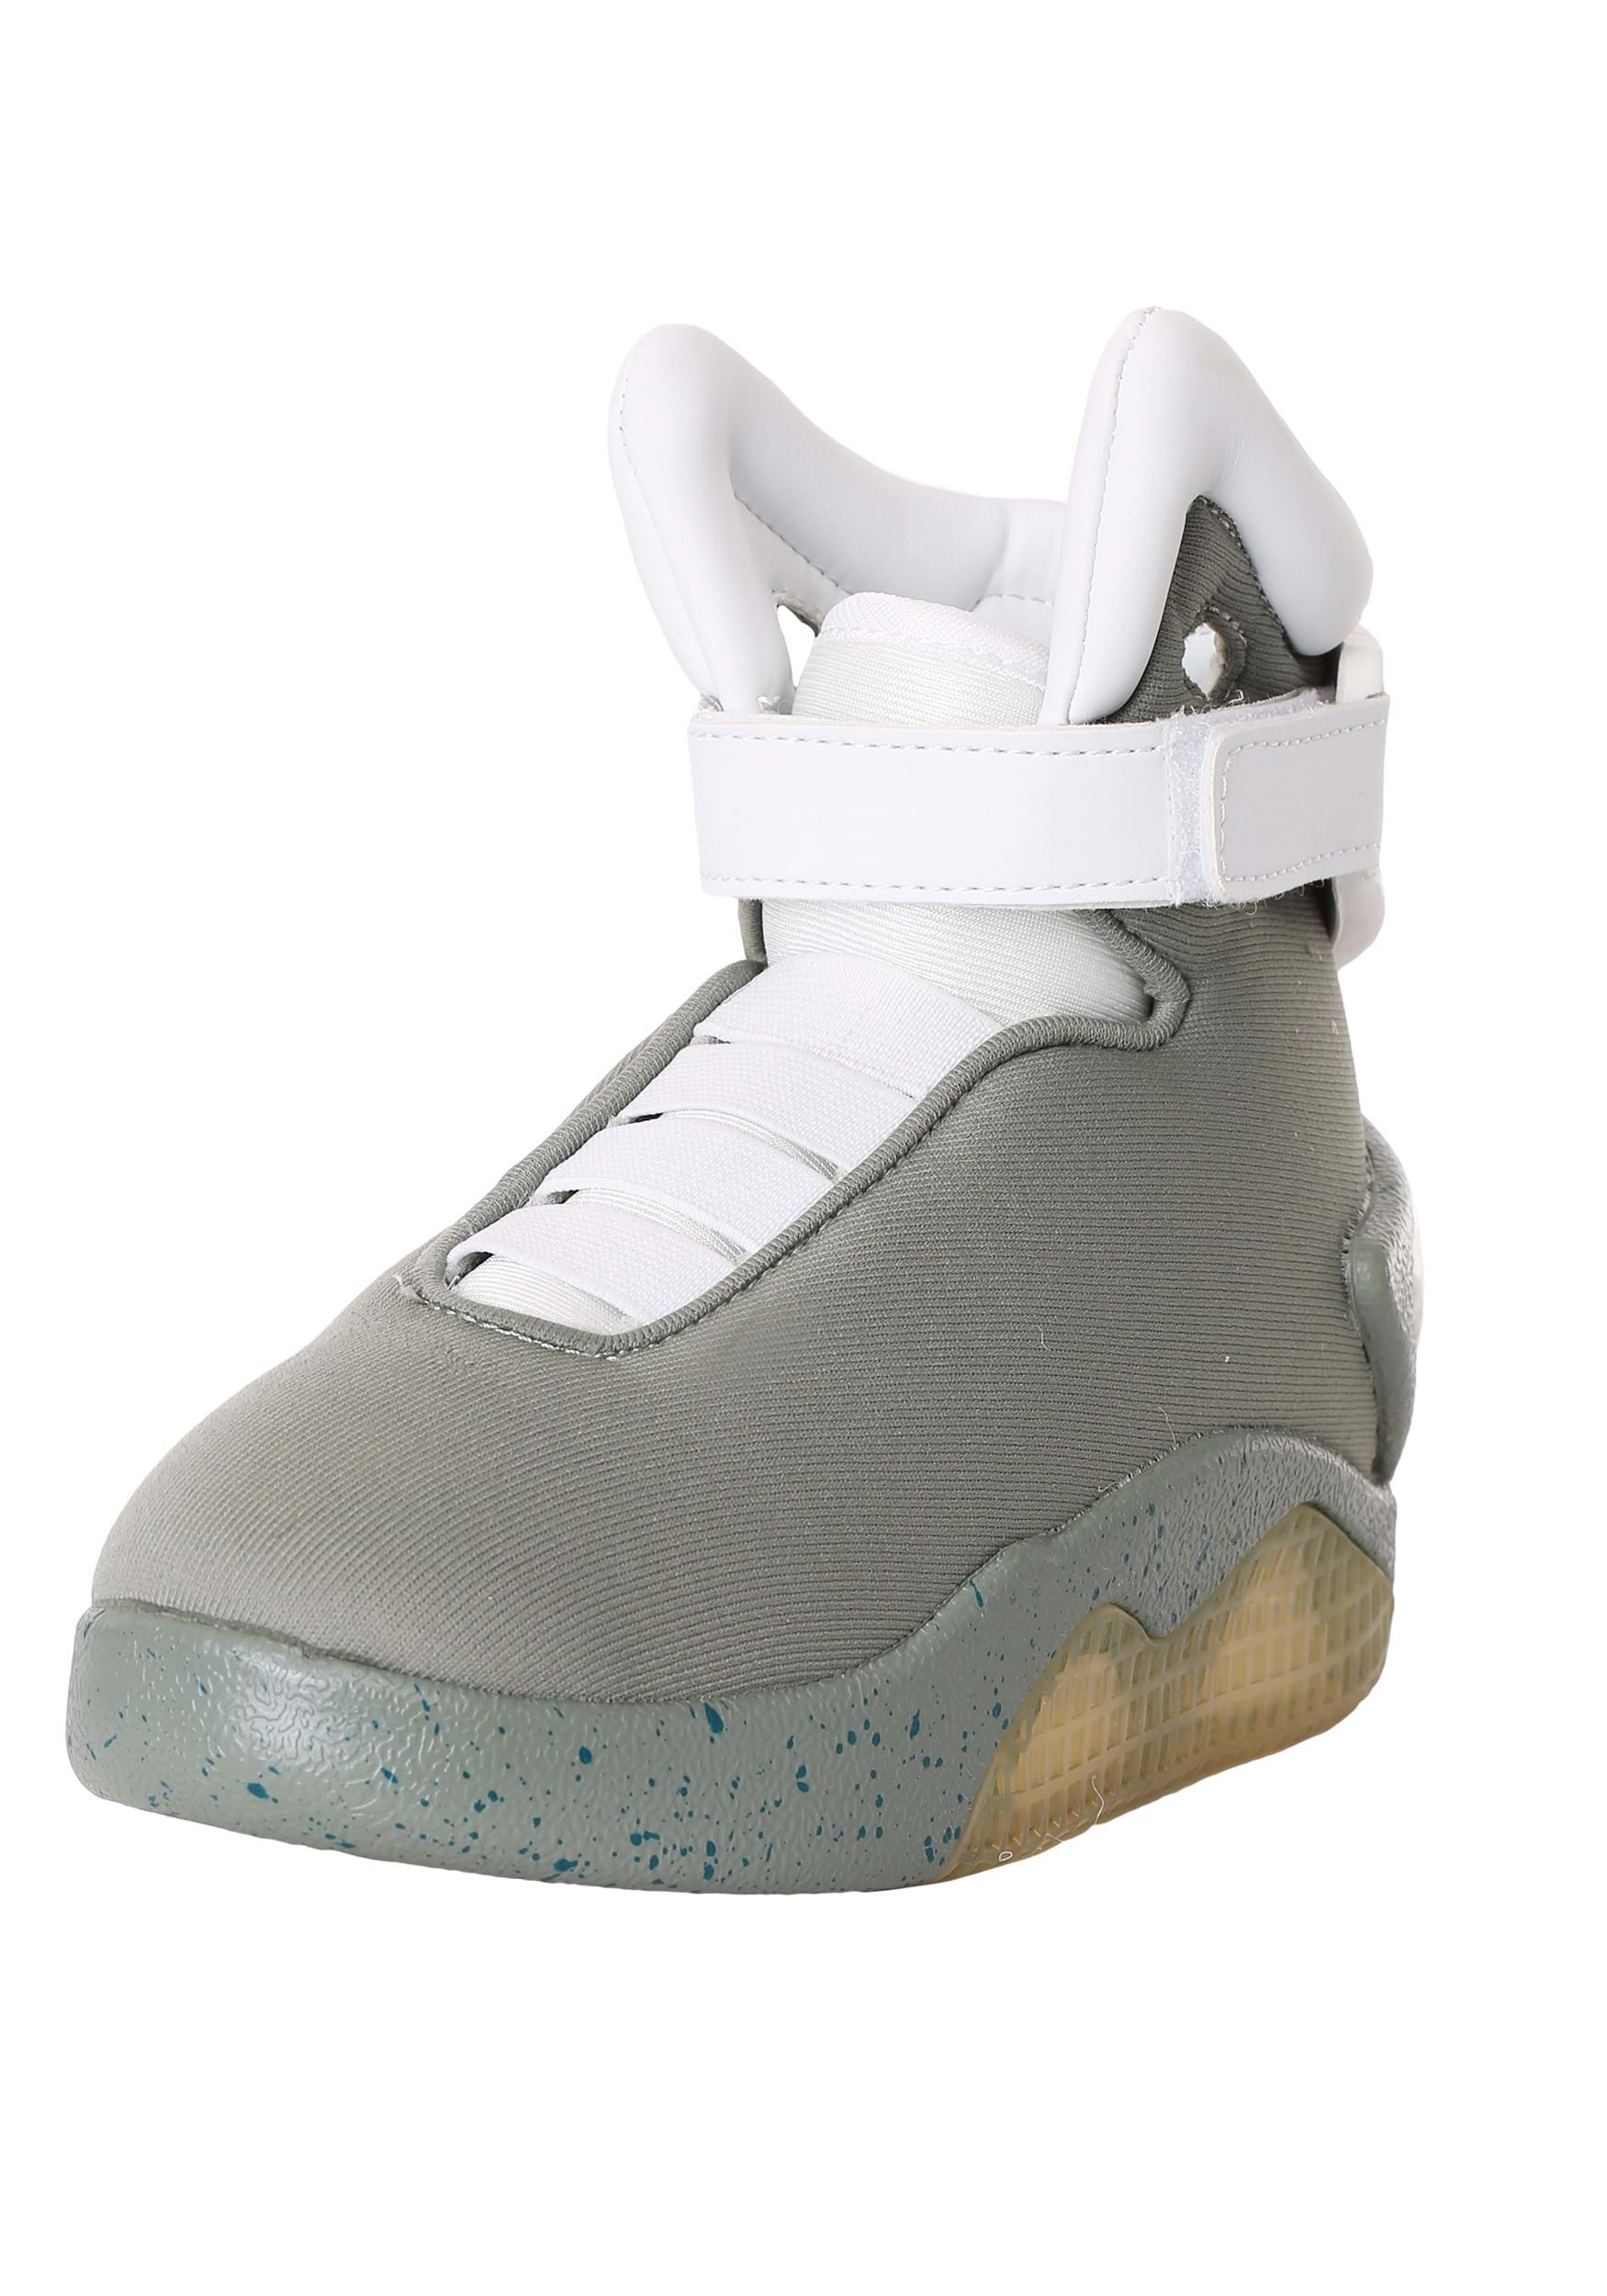 Light Up Back to the Future Kids Shoes